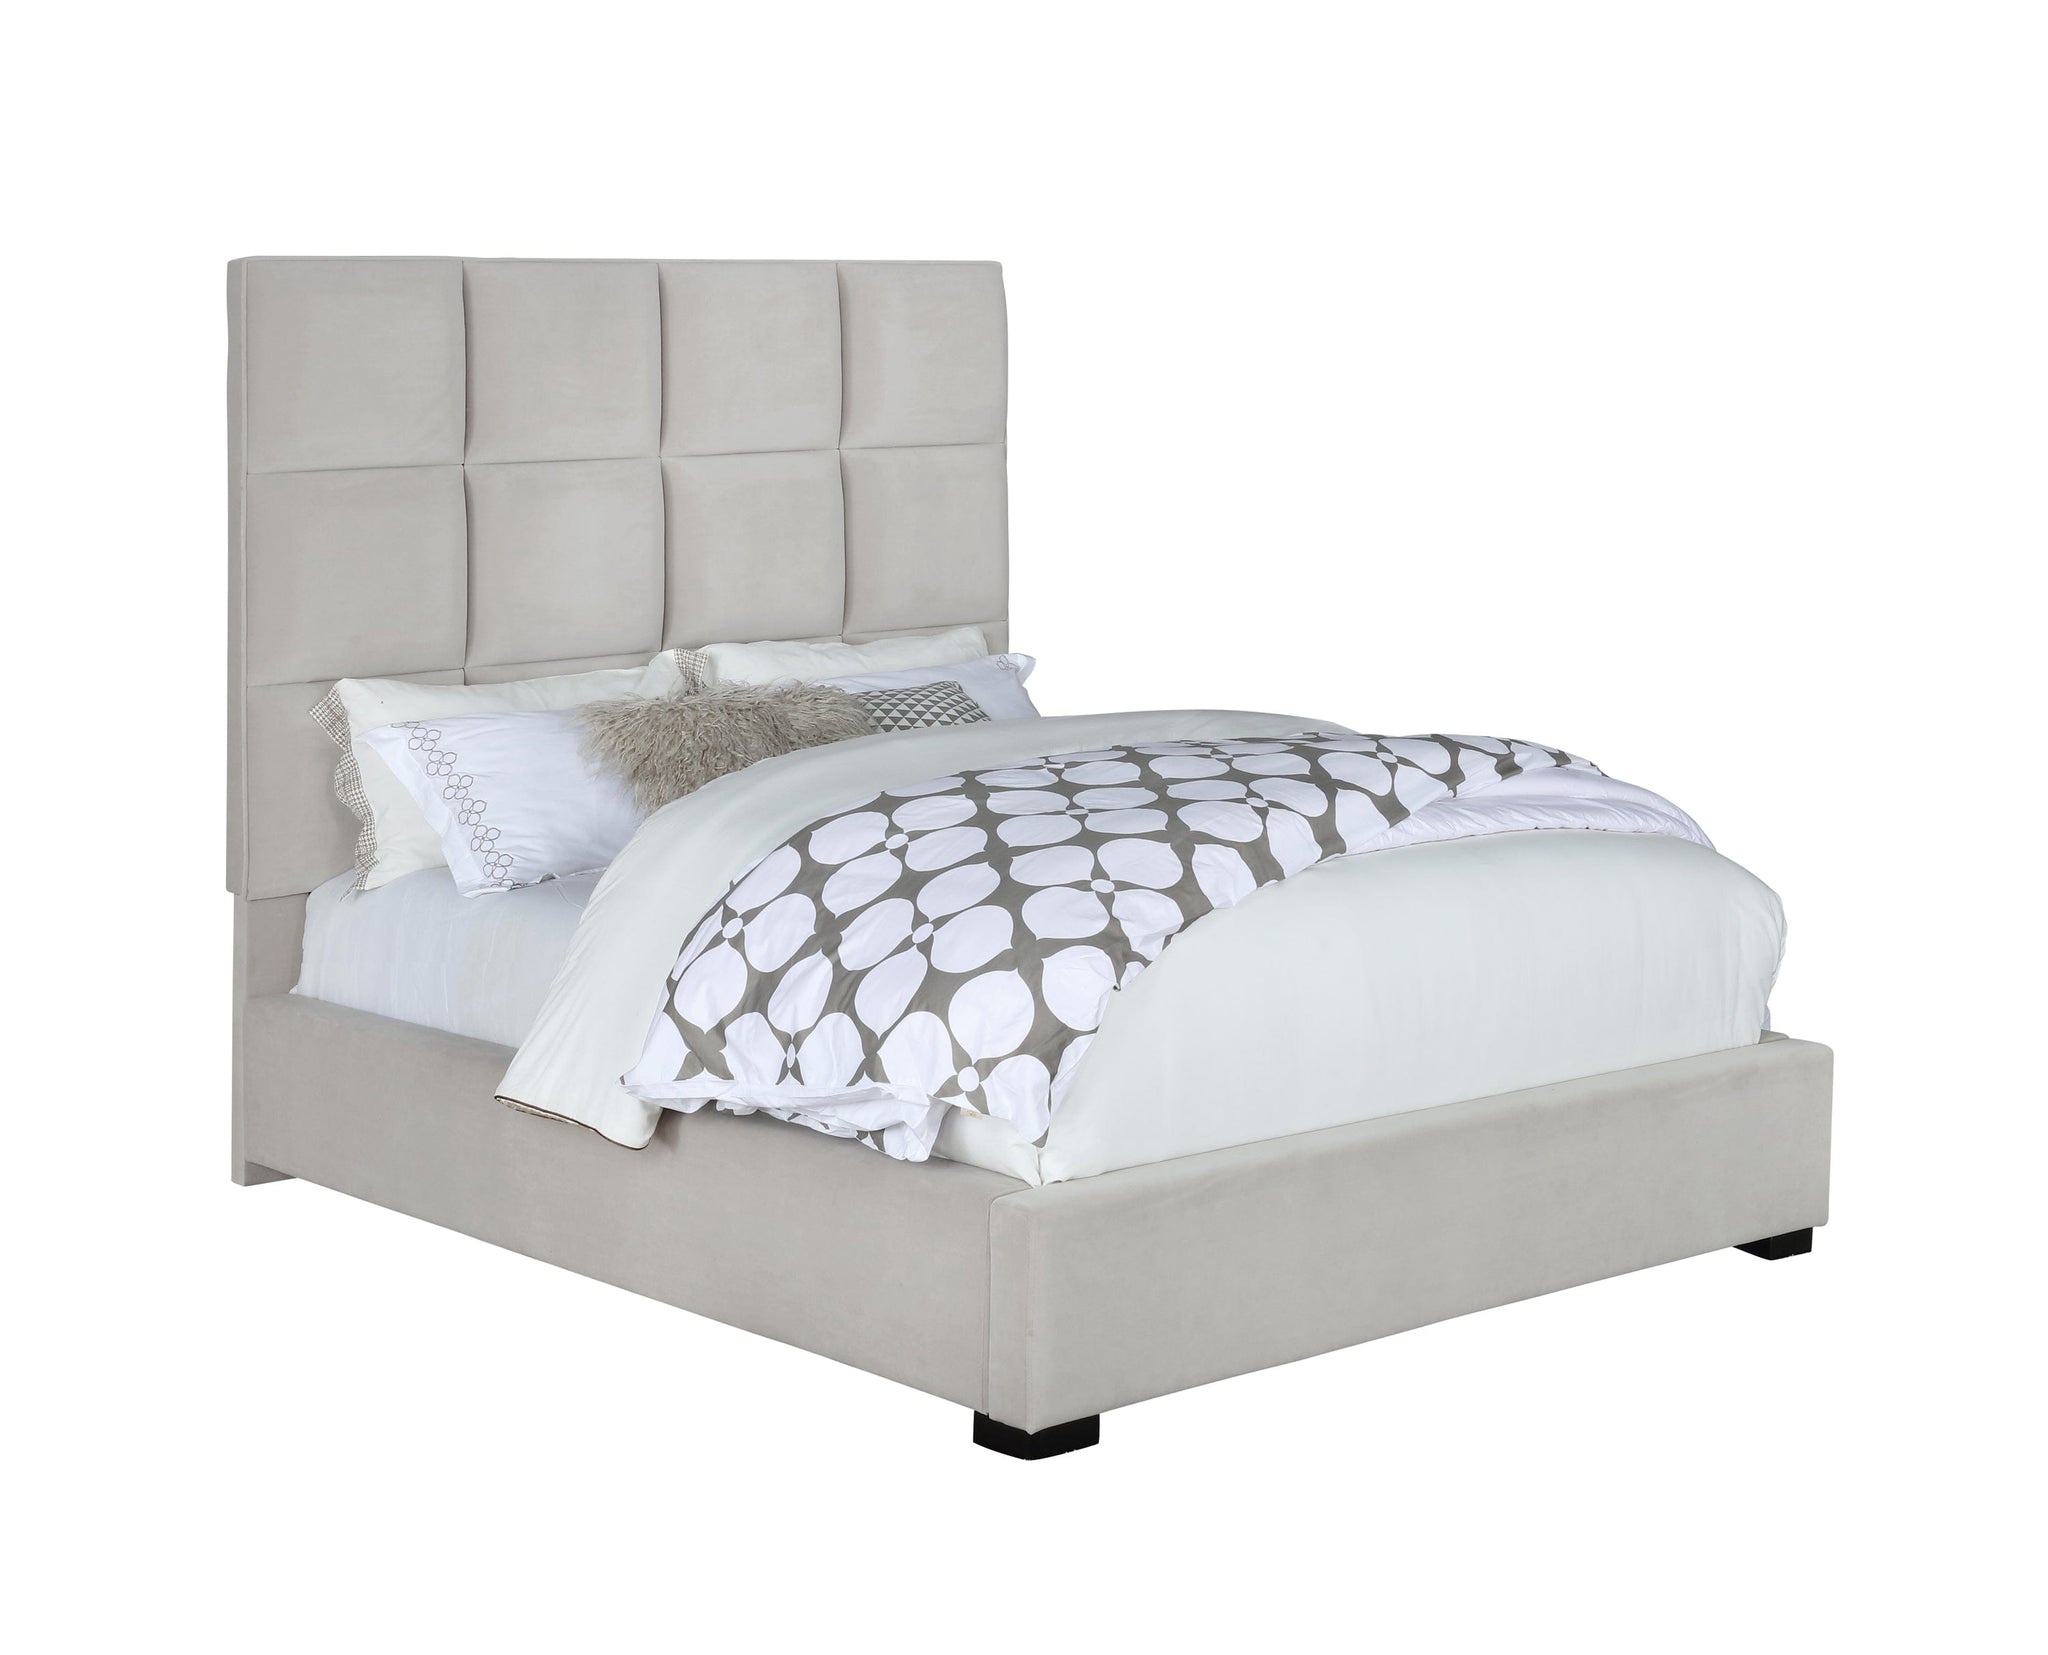 Panes Queen Tufted Upholstered Panel Bed Beige - 315850Q